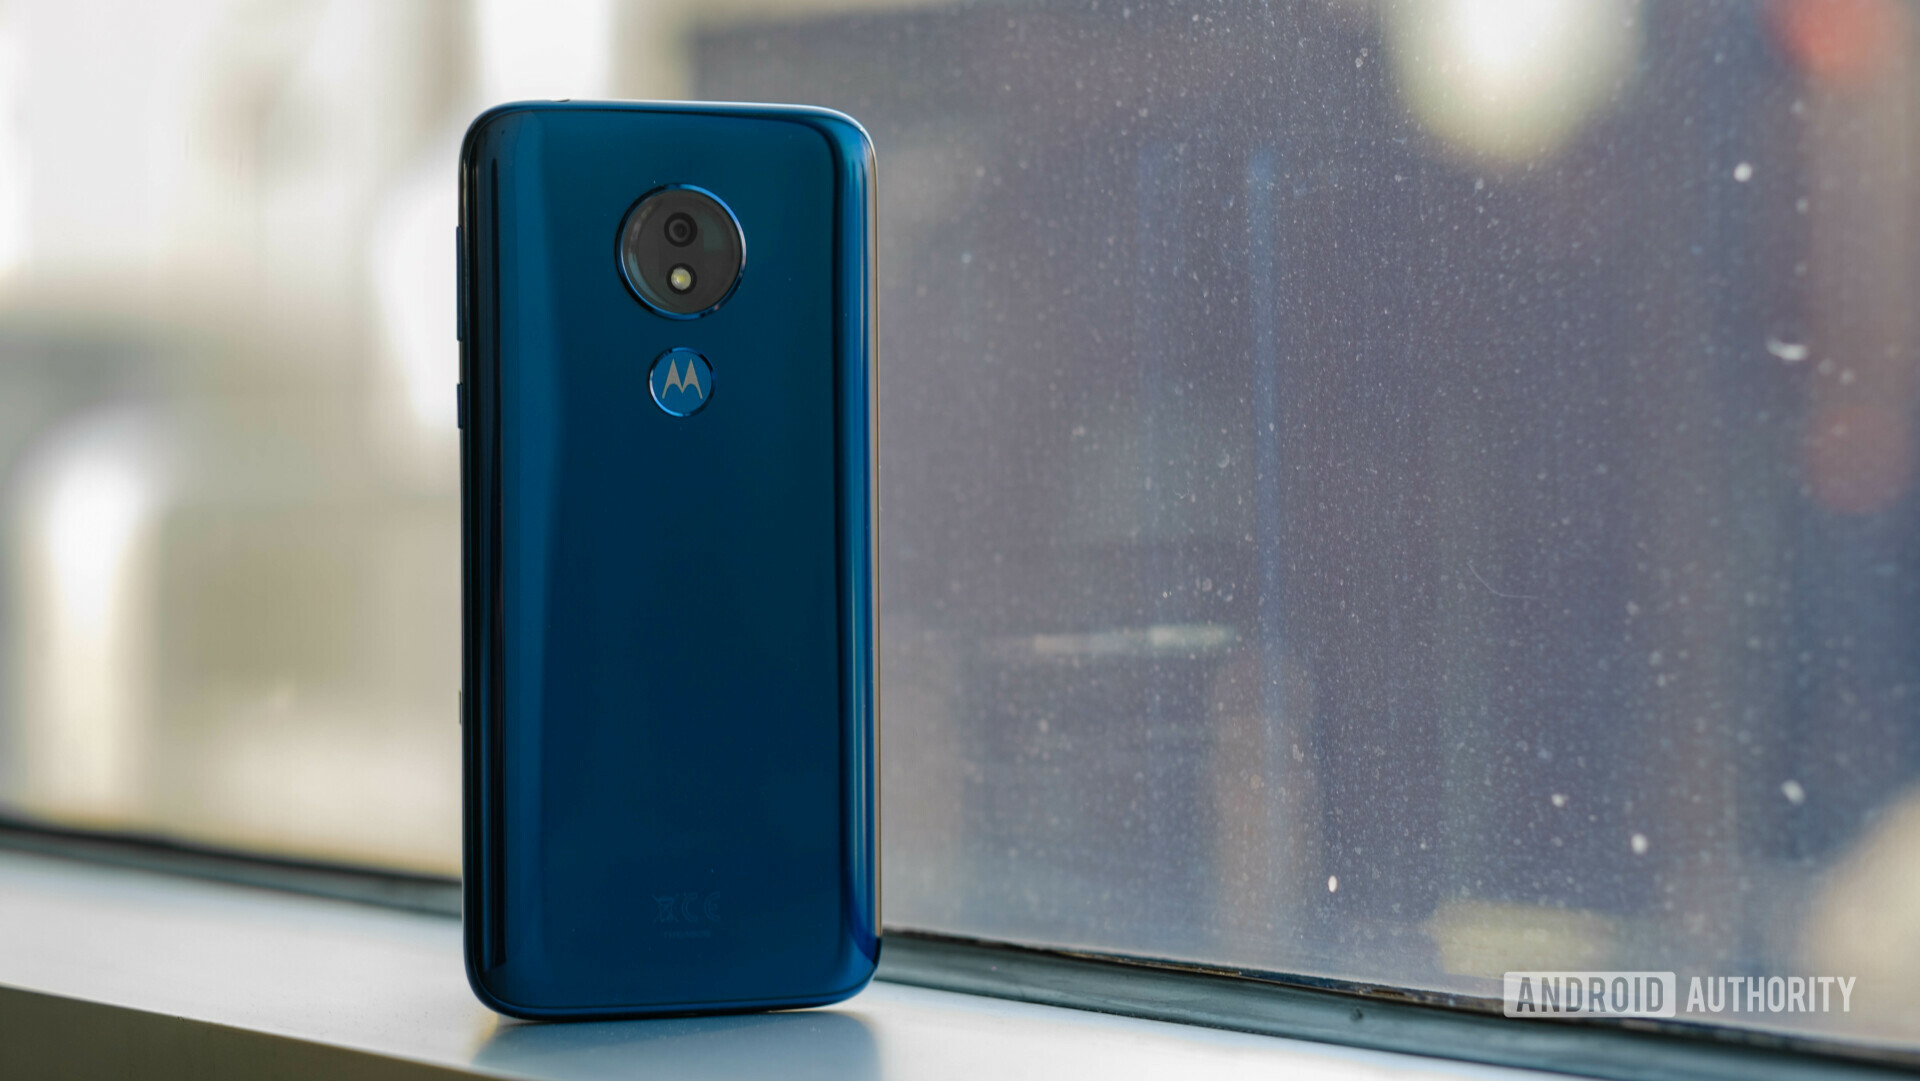 Backside of the new Motorola Moto G7 Power in dark blue color standing upright in front of a window.